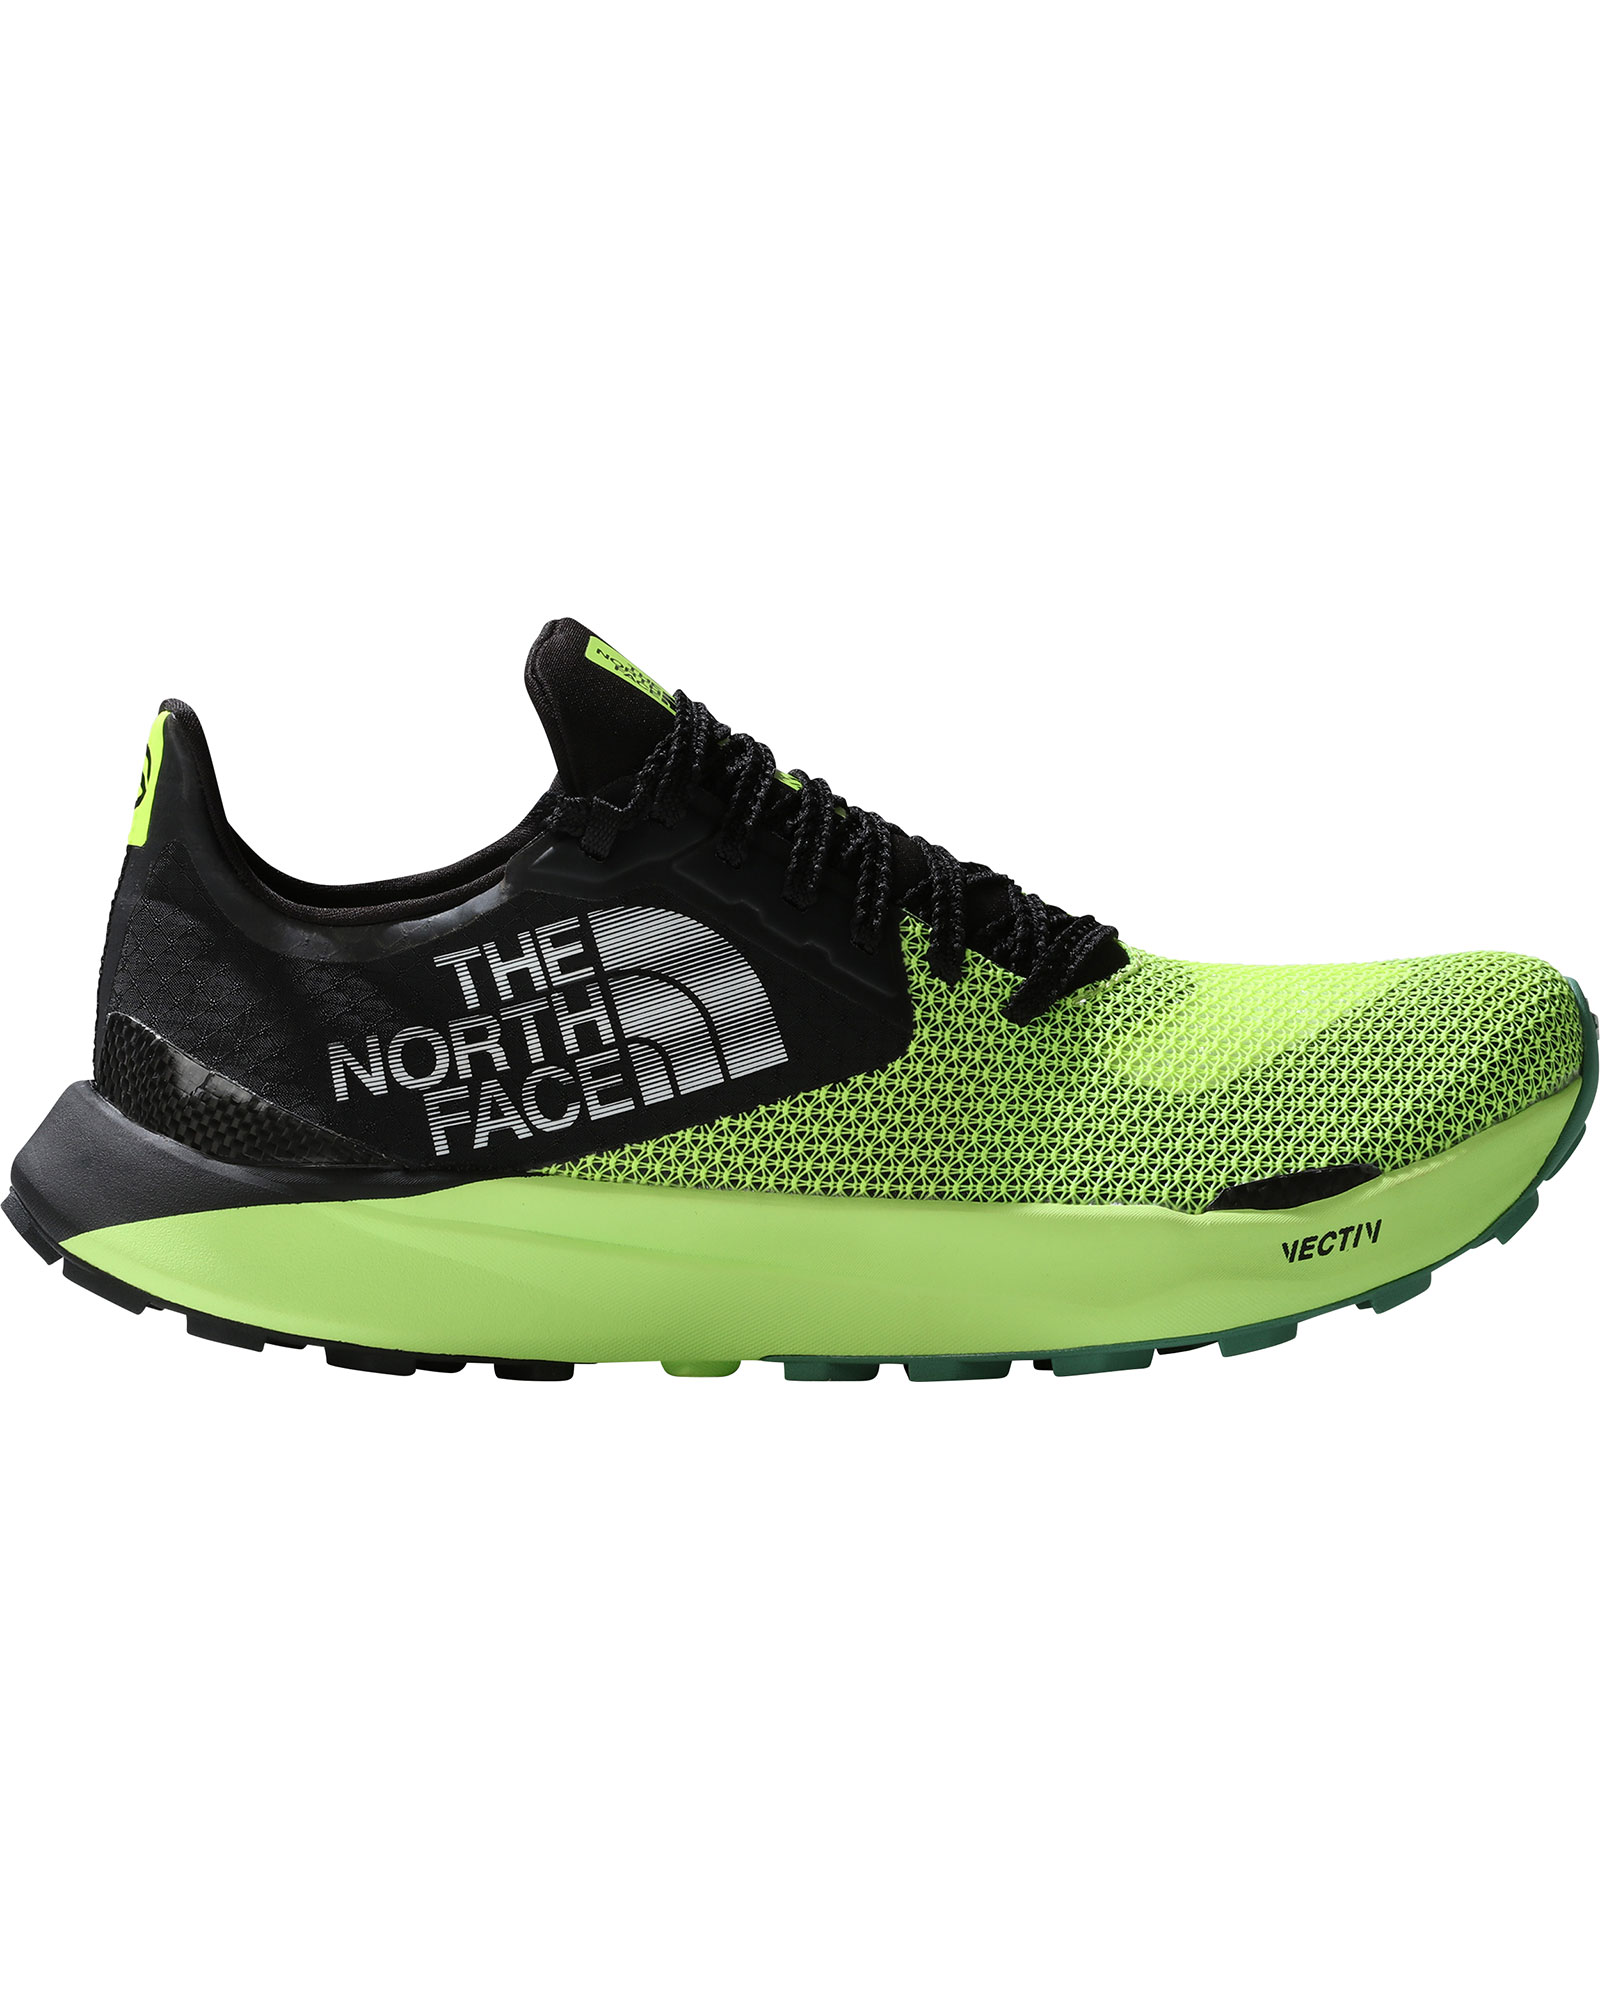 The North Face Summit Vectiv Sky Men’s Trail Shoes - LED Yellow/TNF Black UK 10.5